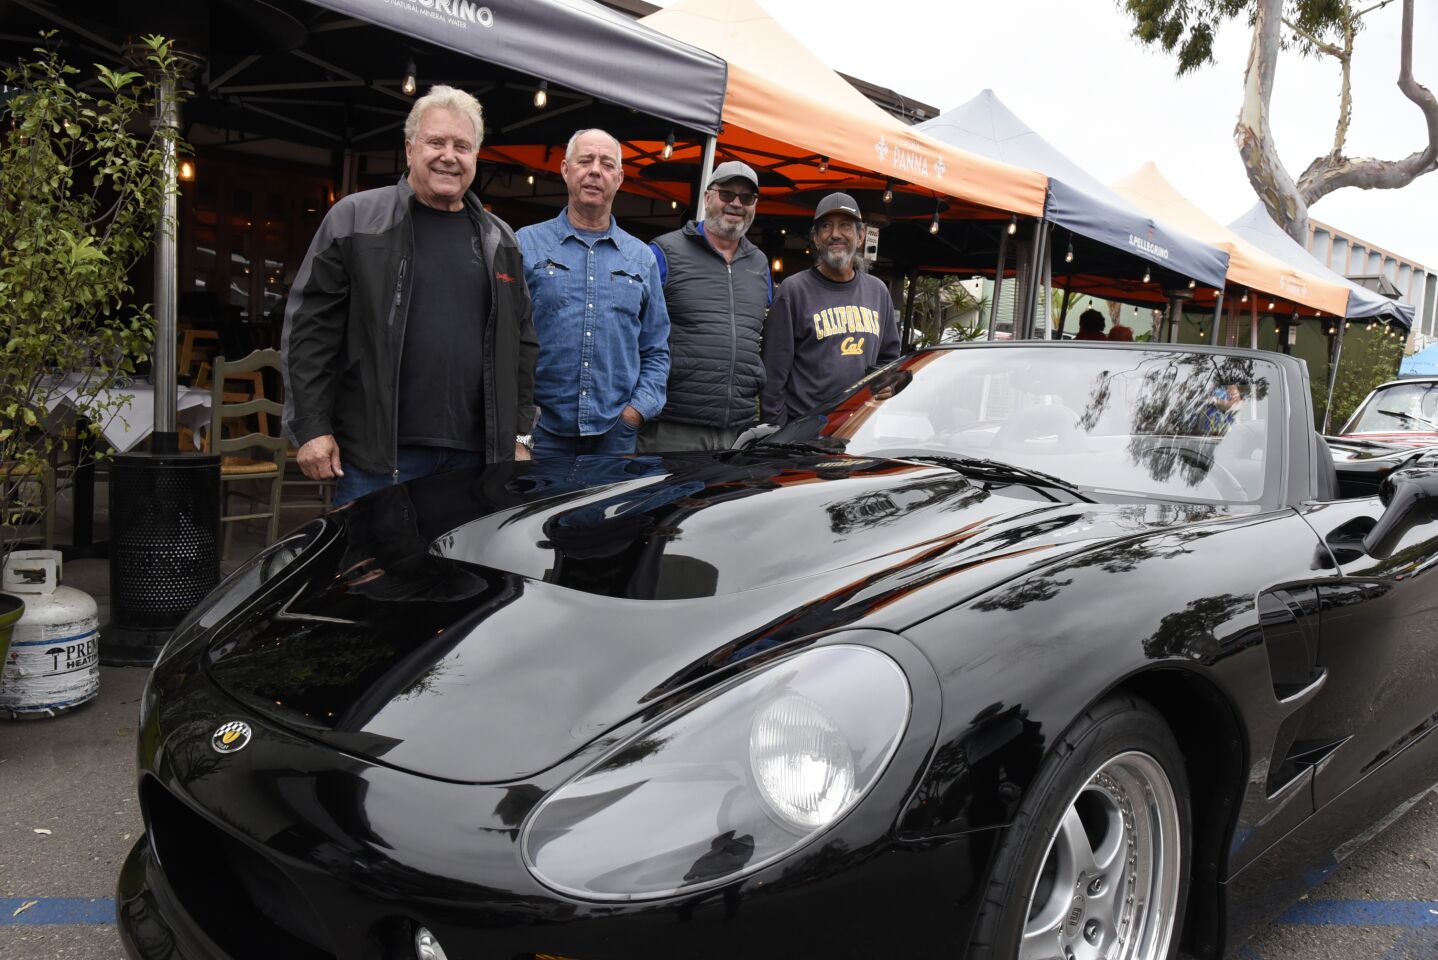 Cal Patronaggio and his classic Shelby, Klaus Reichardt, Lawrence Sher, Gary Samad